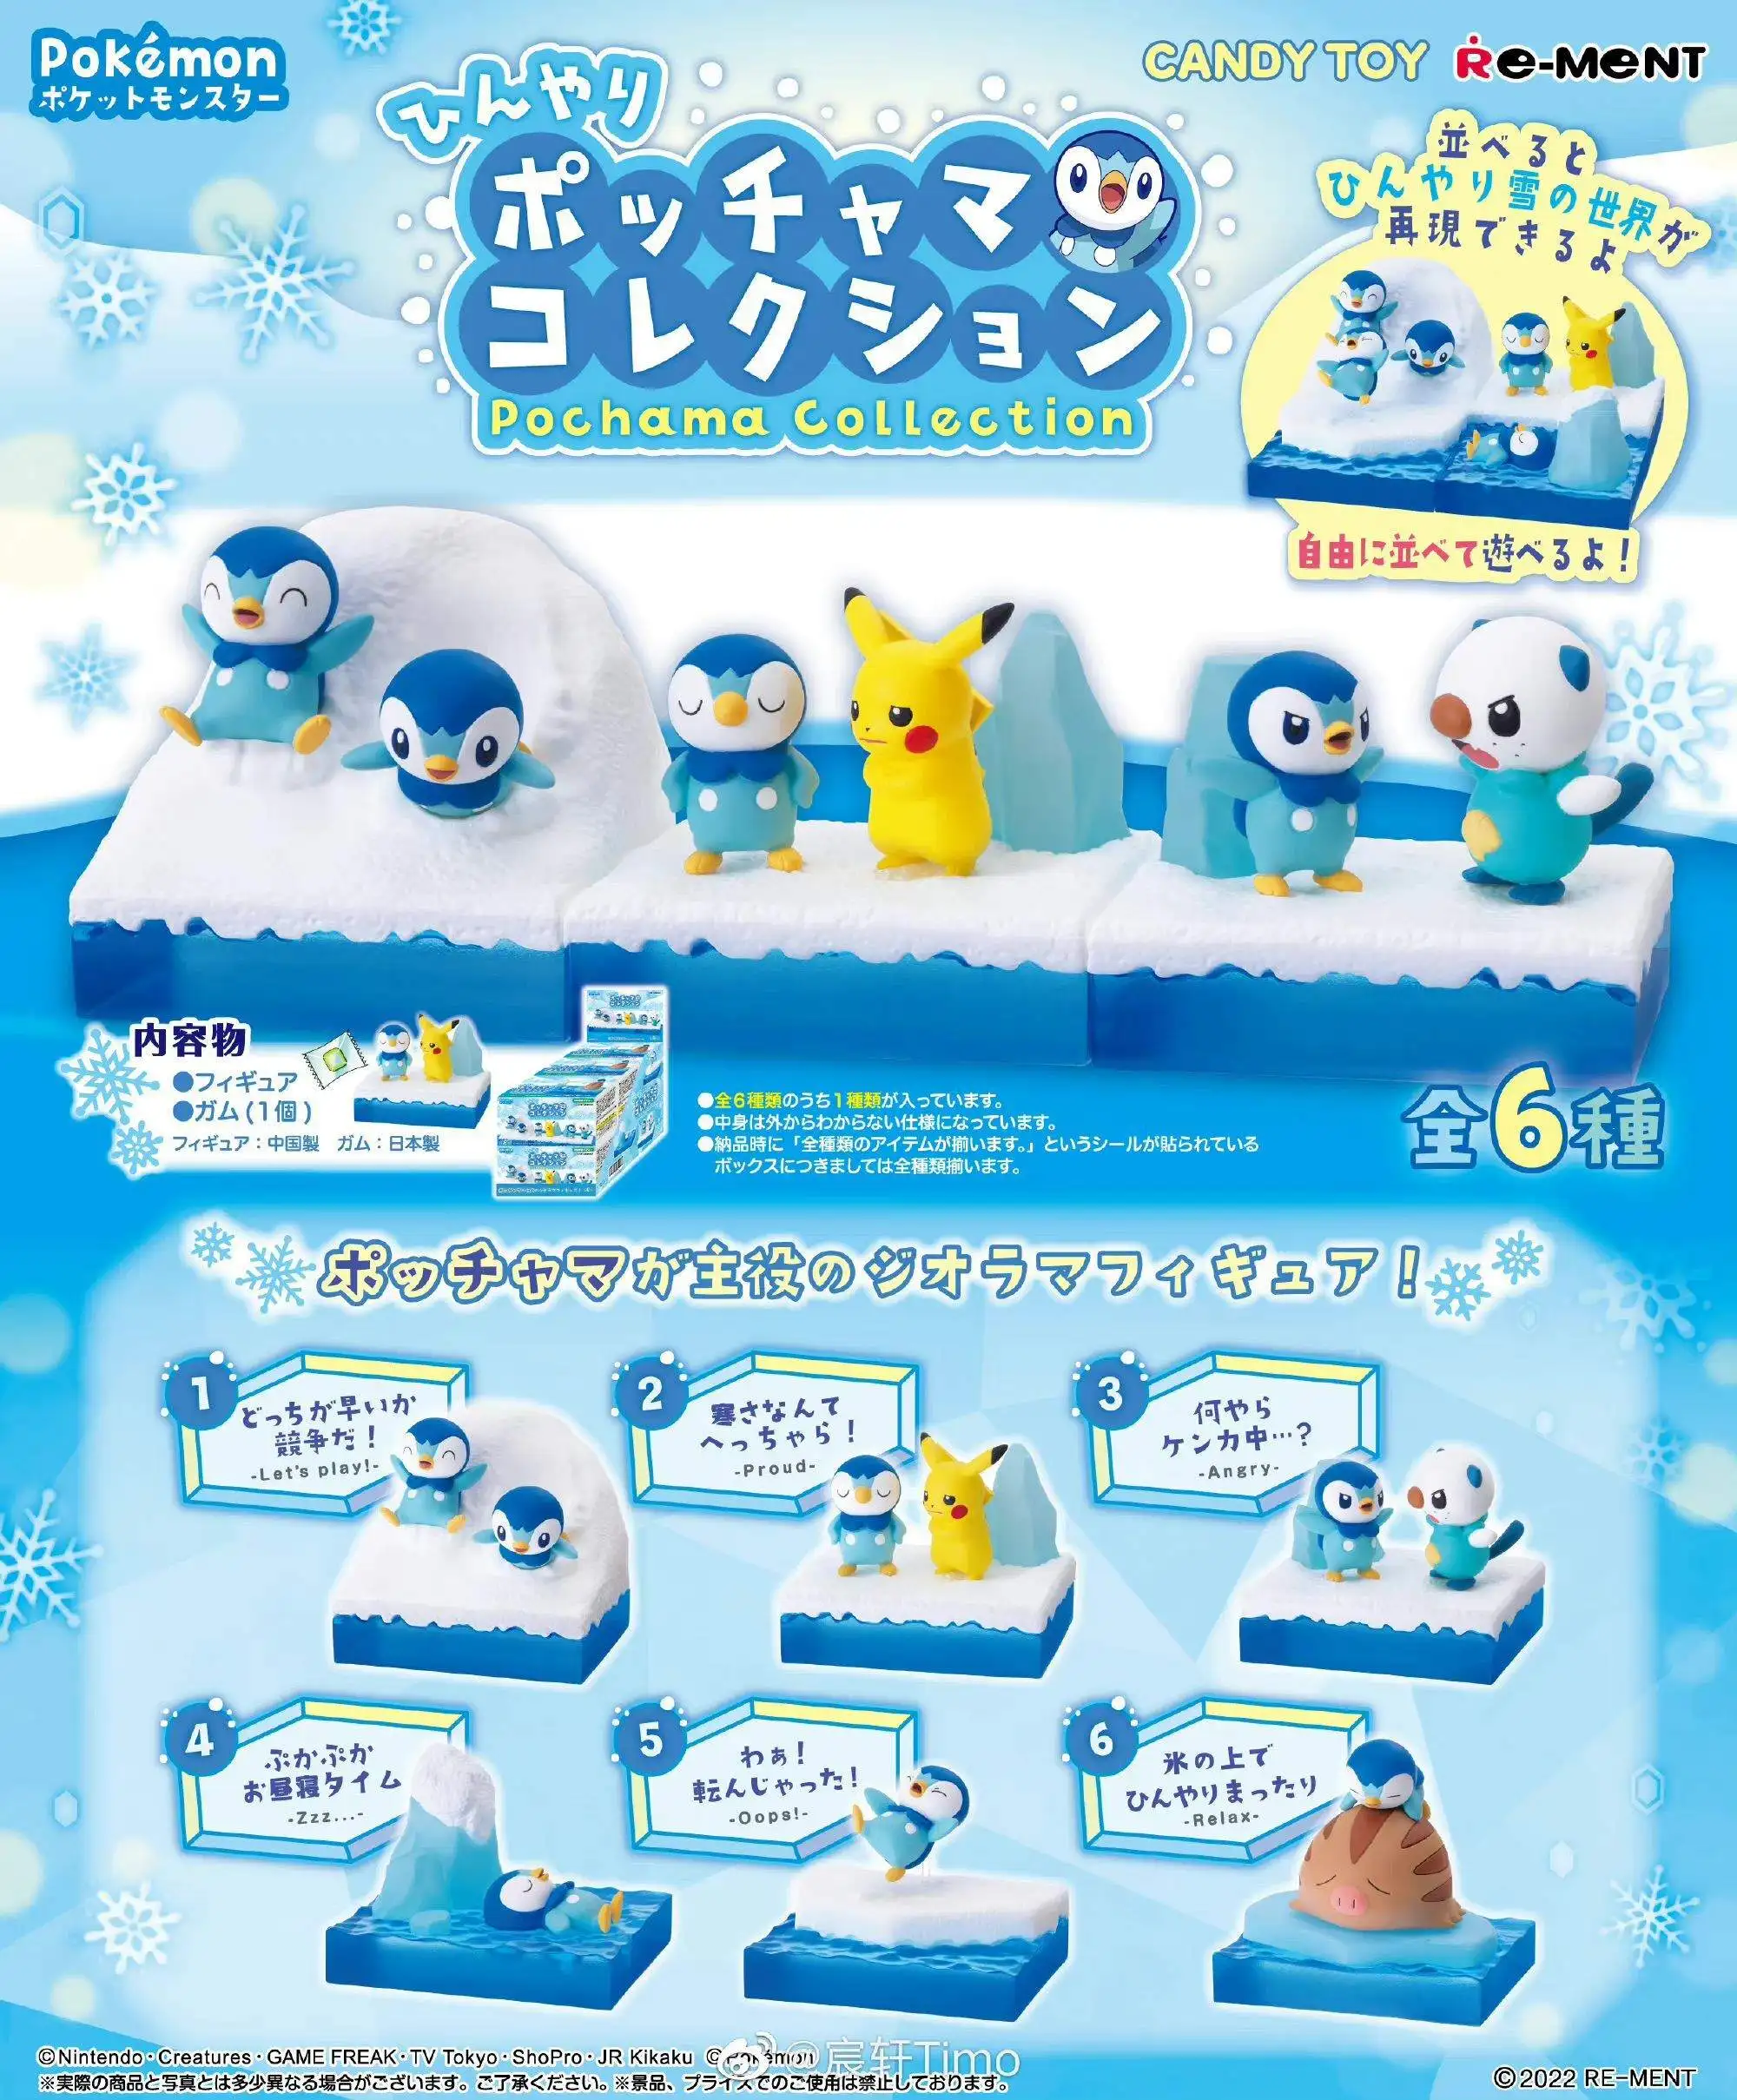 

Bandai Food Play Blind Box Pokemon Pikachu Piplup Ice and Snow Scene Decoration Spot Finished Product Figure Model Toy